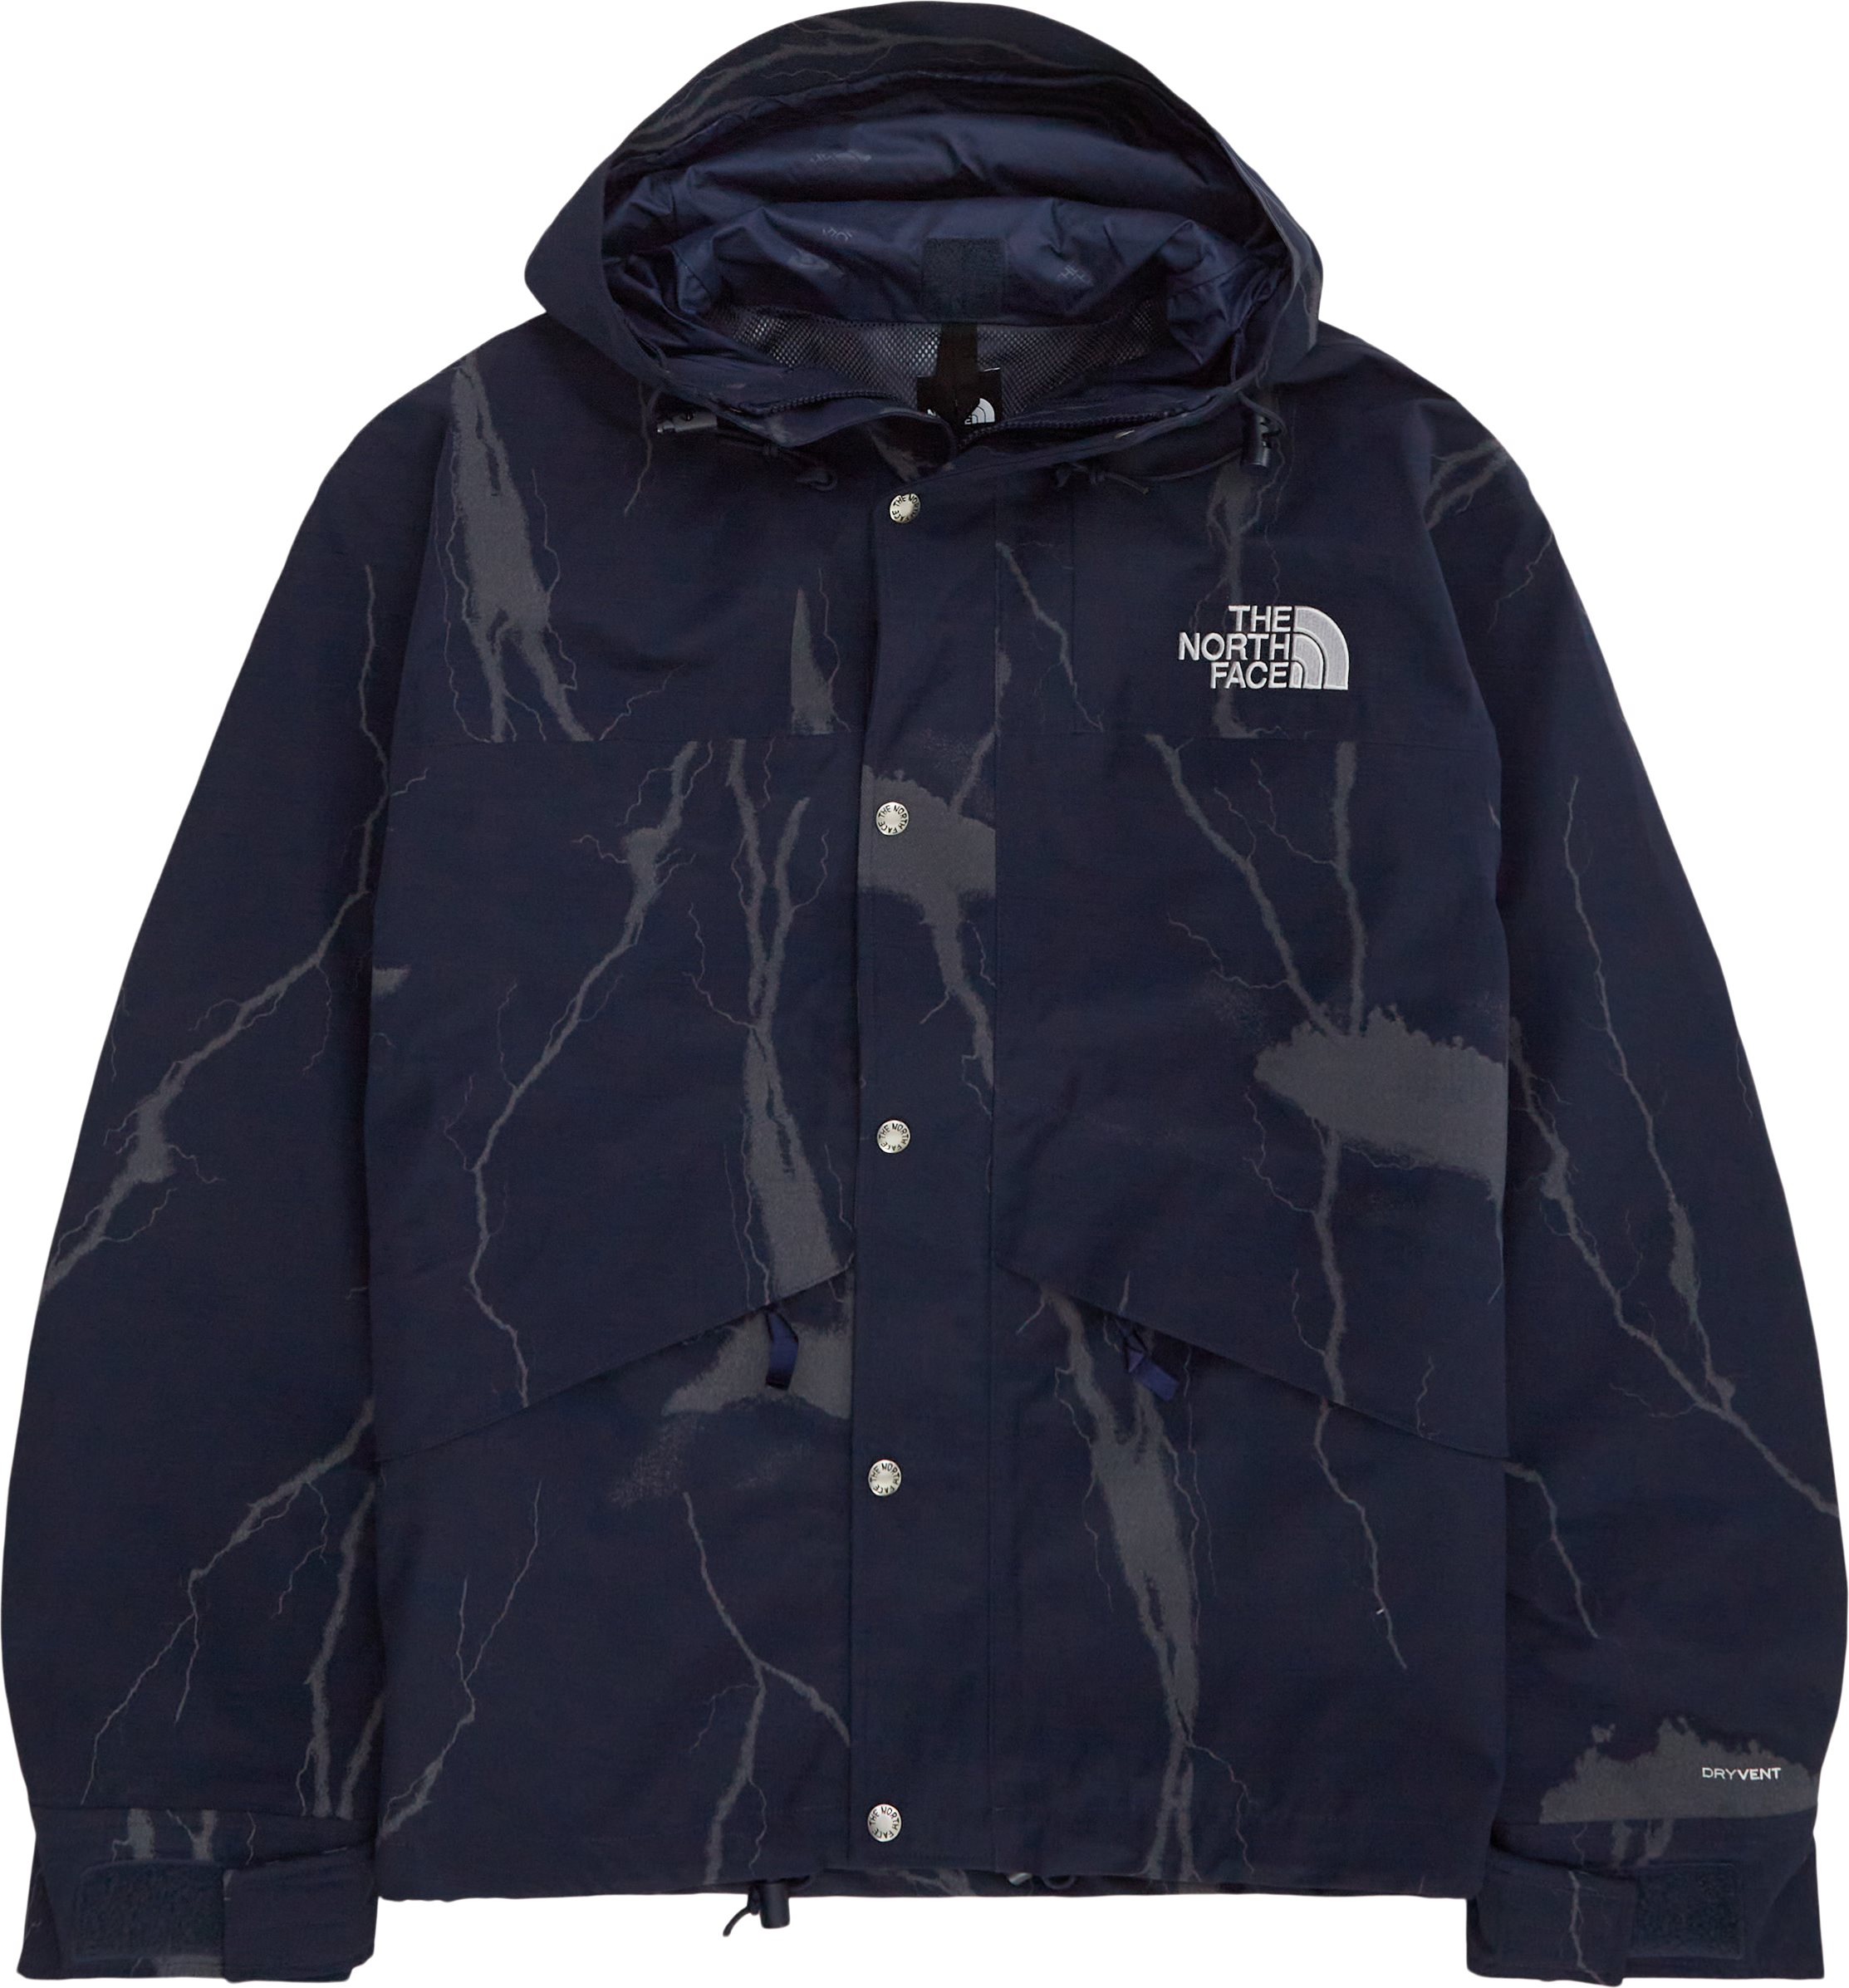 The North Face Jackets 86 NOVELTY NF0A86ZR Blue